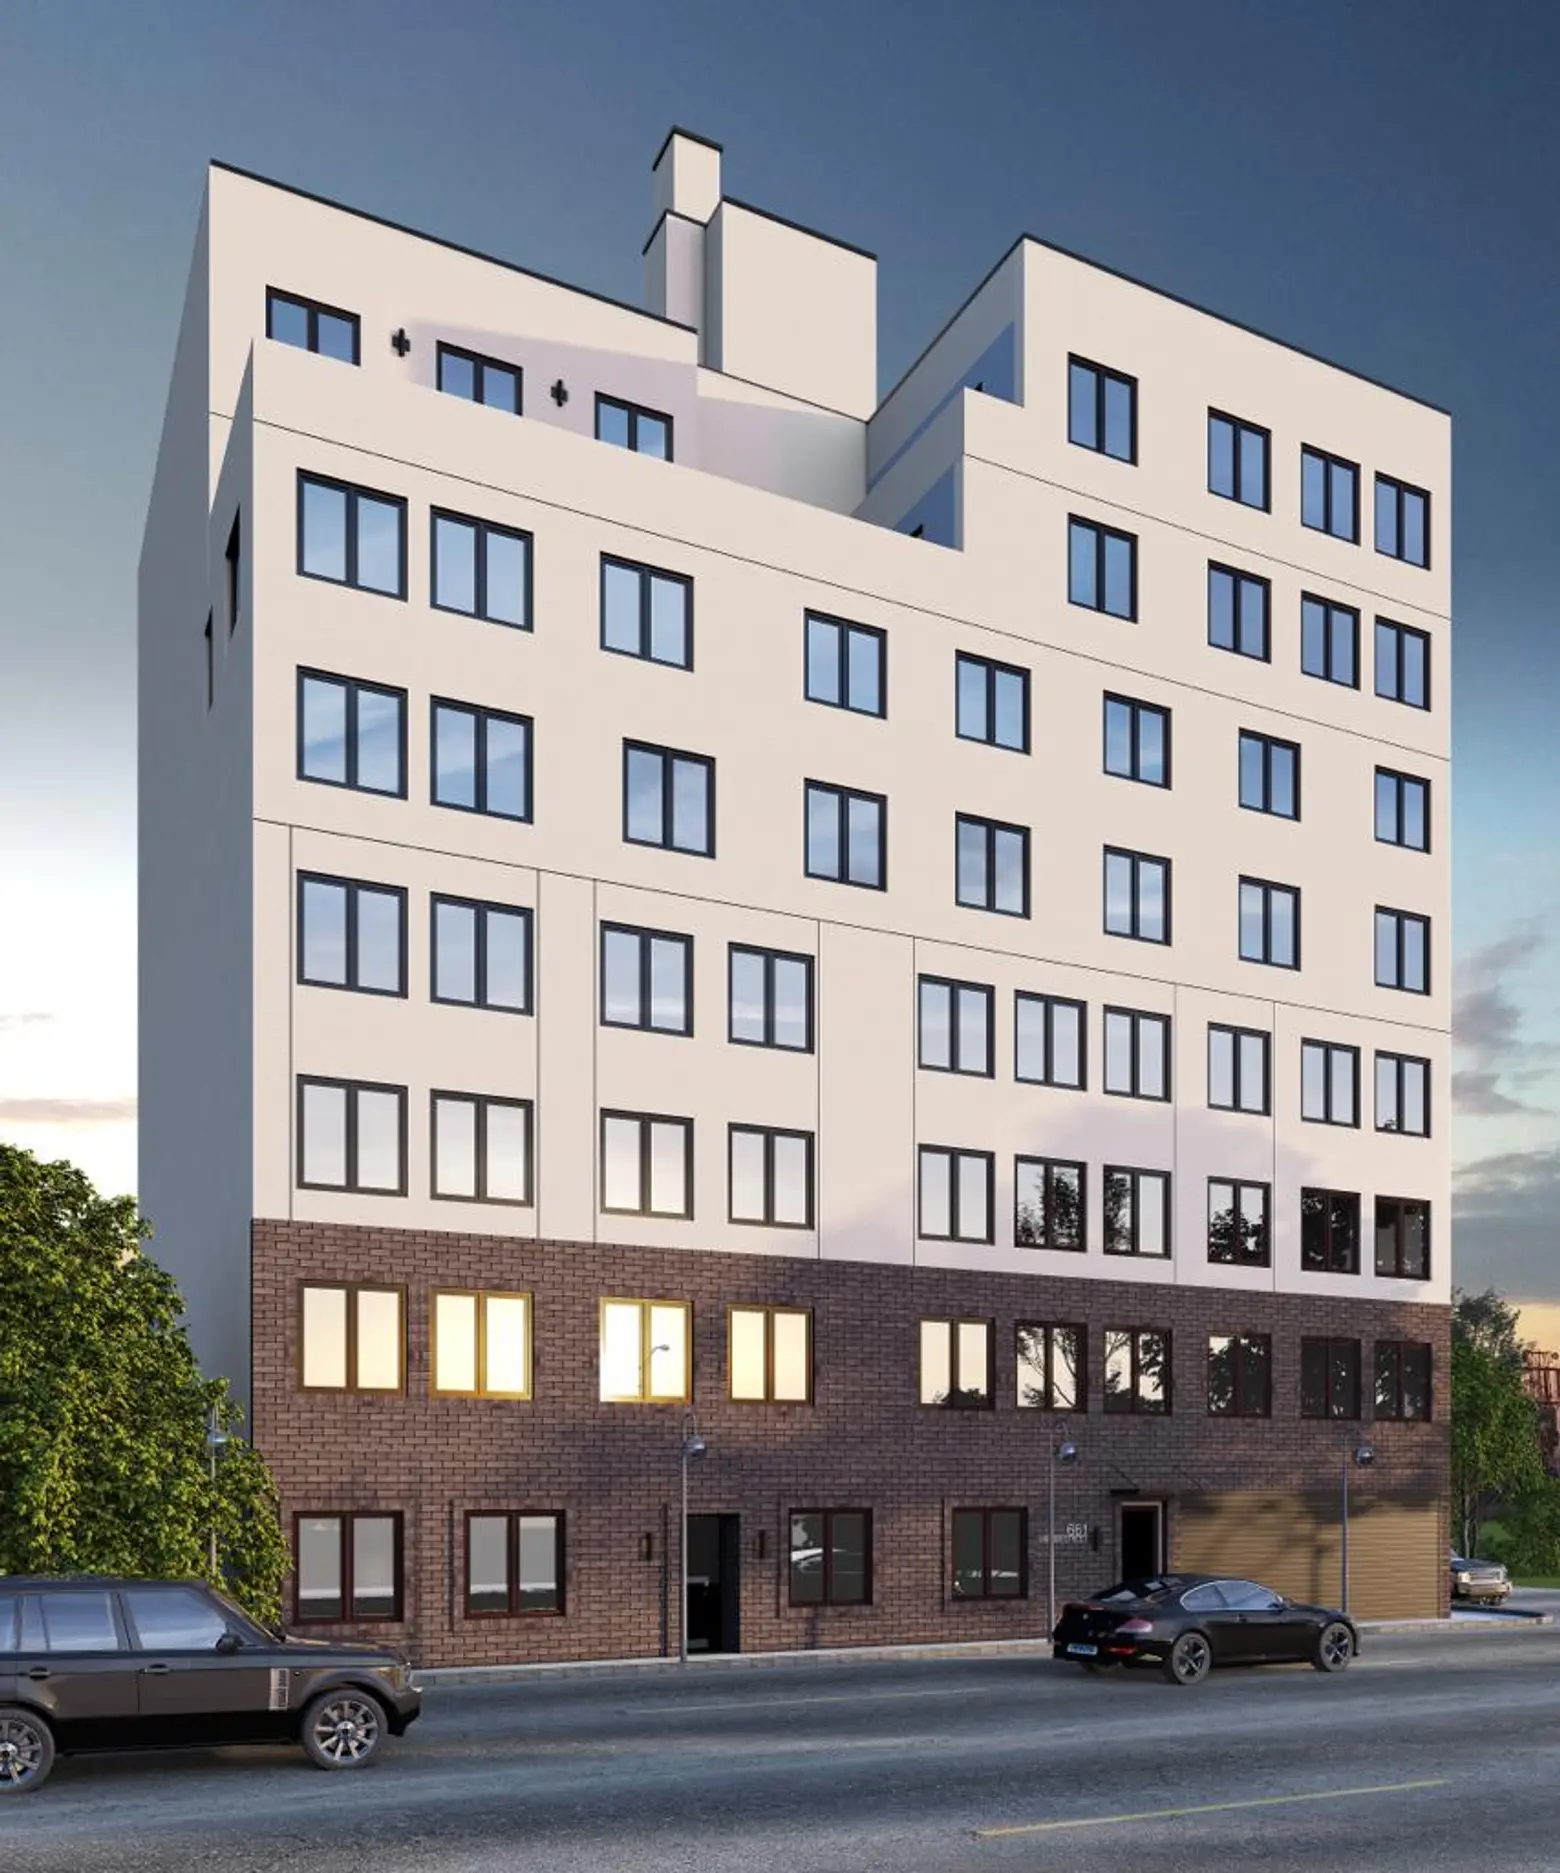 Lottery opens for 32 low-income units designed for seniors in Hunts Point, from $1,487/month